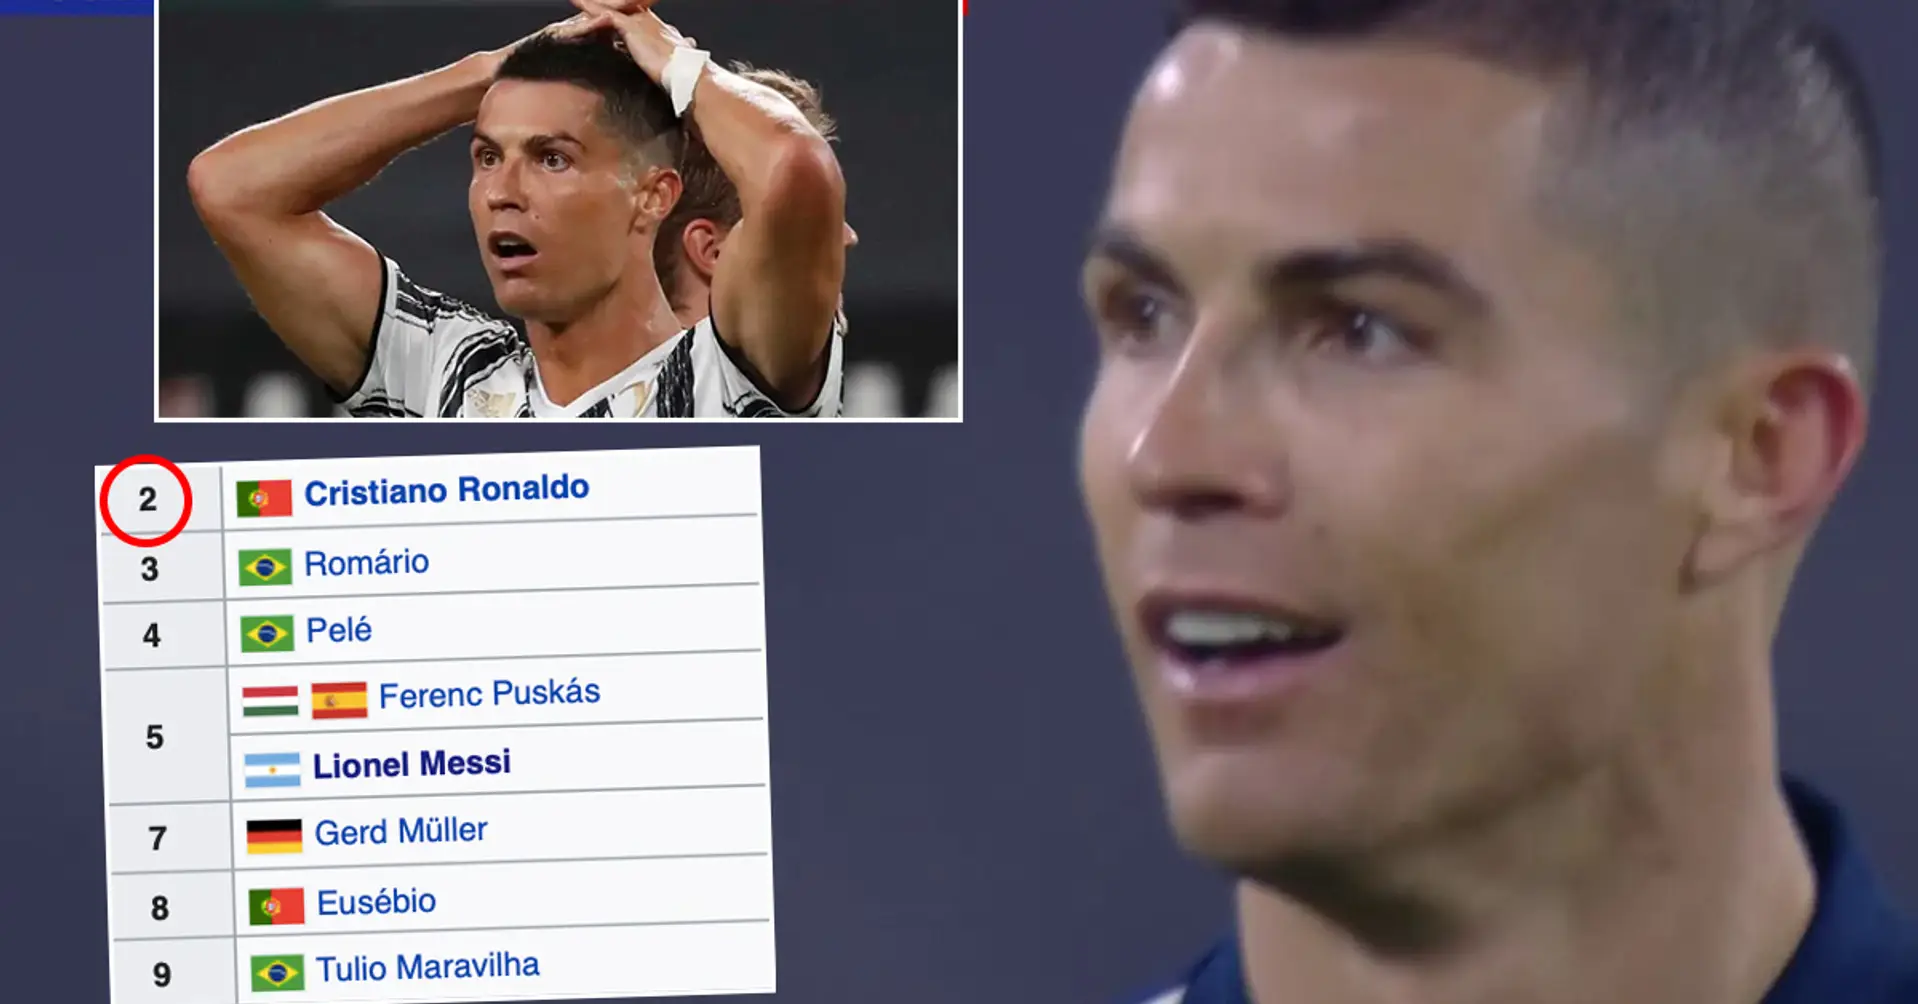 Everyone says that Cristiano Ronaldo is all-time top goalscorer – but this might be not 100% true